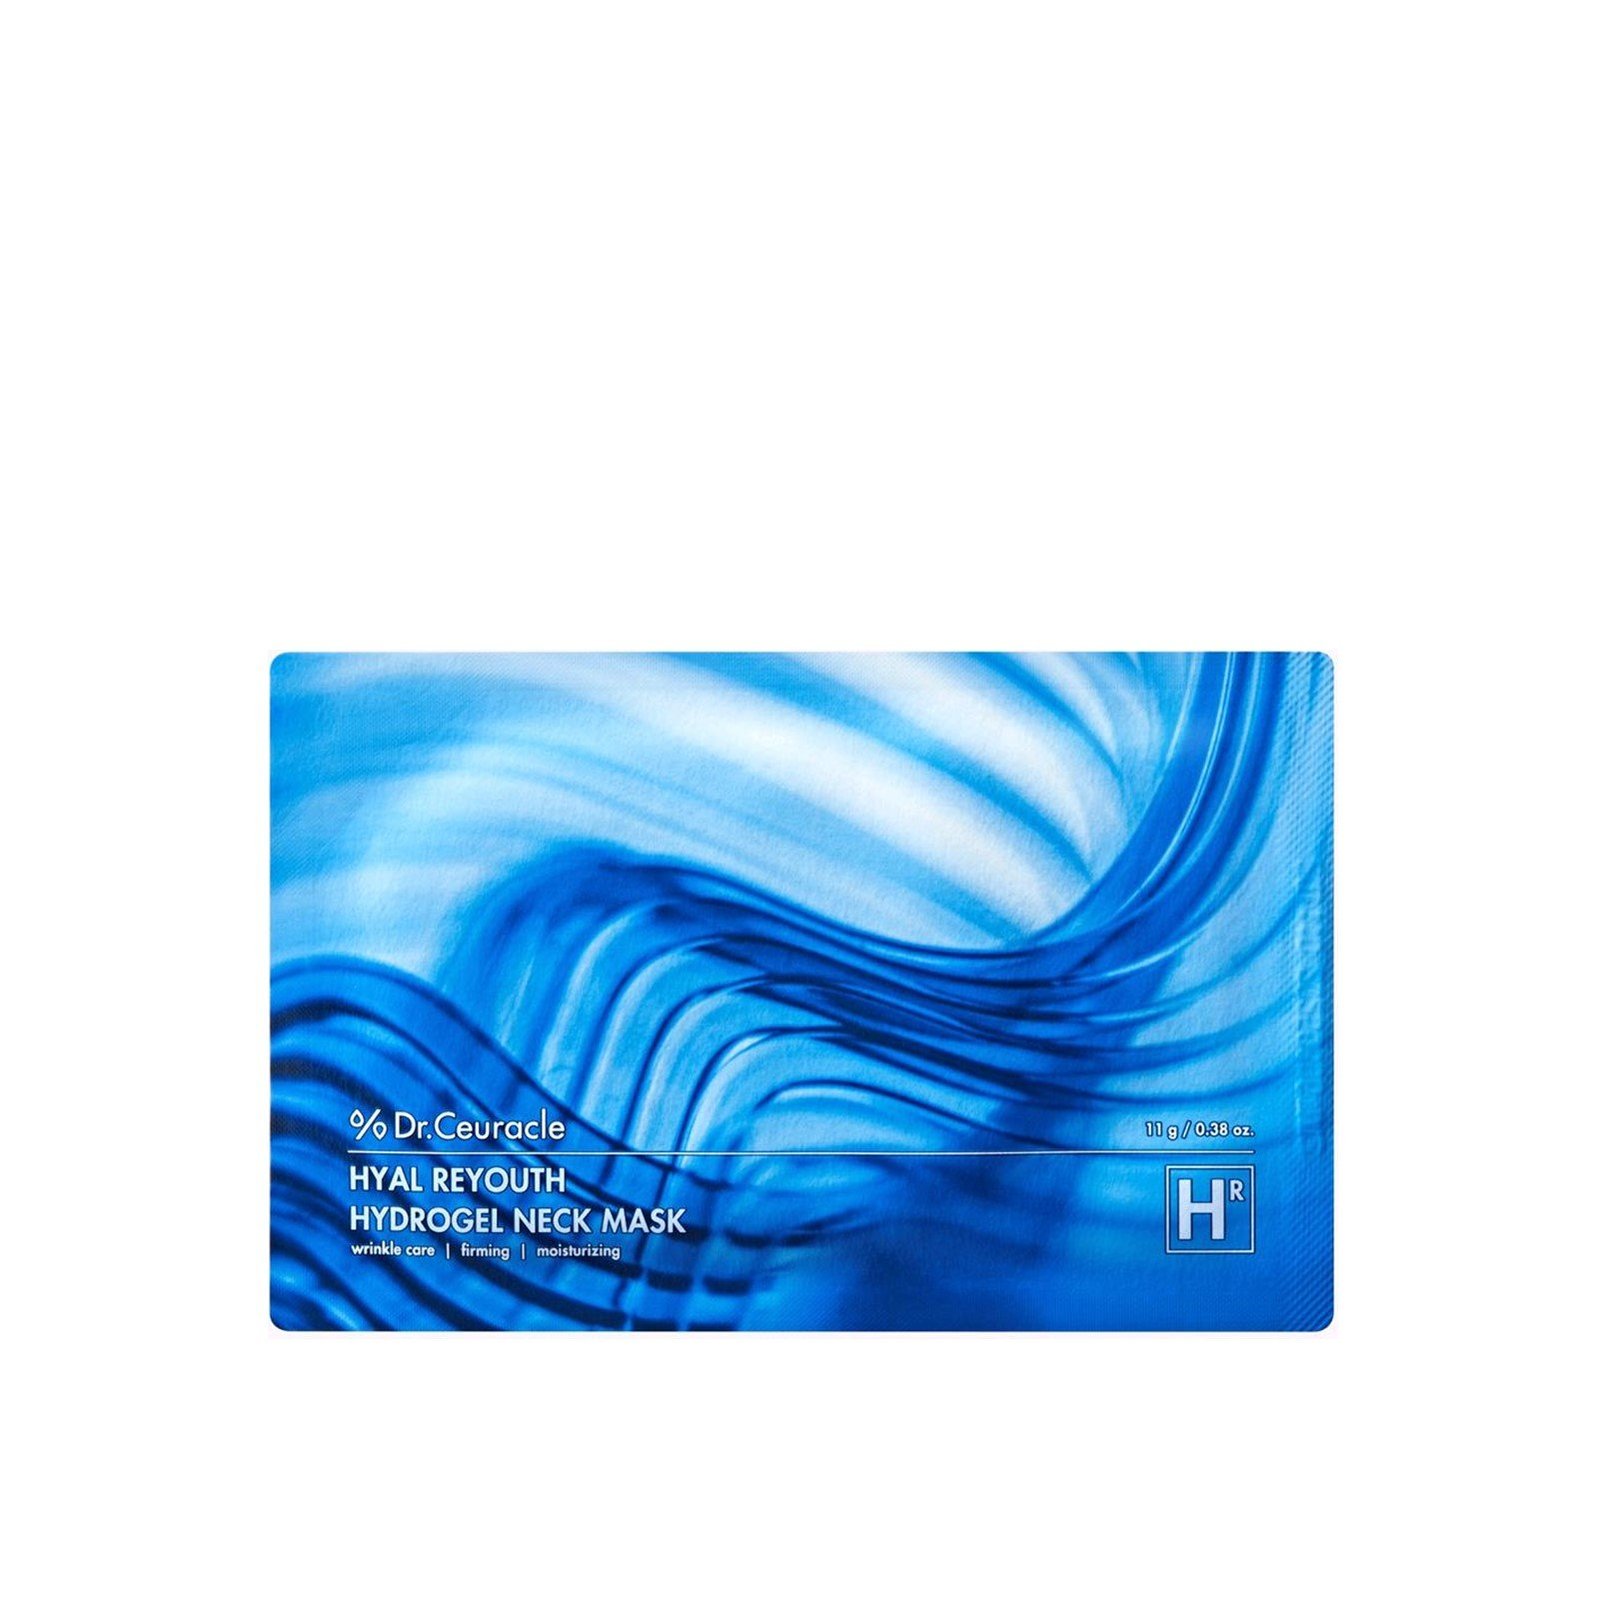 Dr. Ceuracle Hyal Reyouth Hydrogel Neck Mask 11g